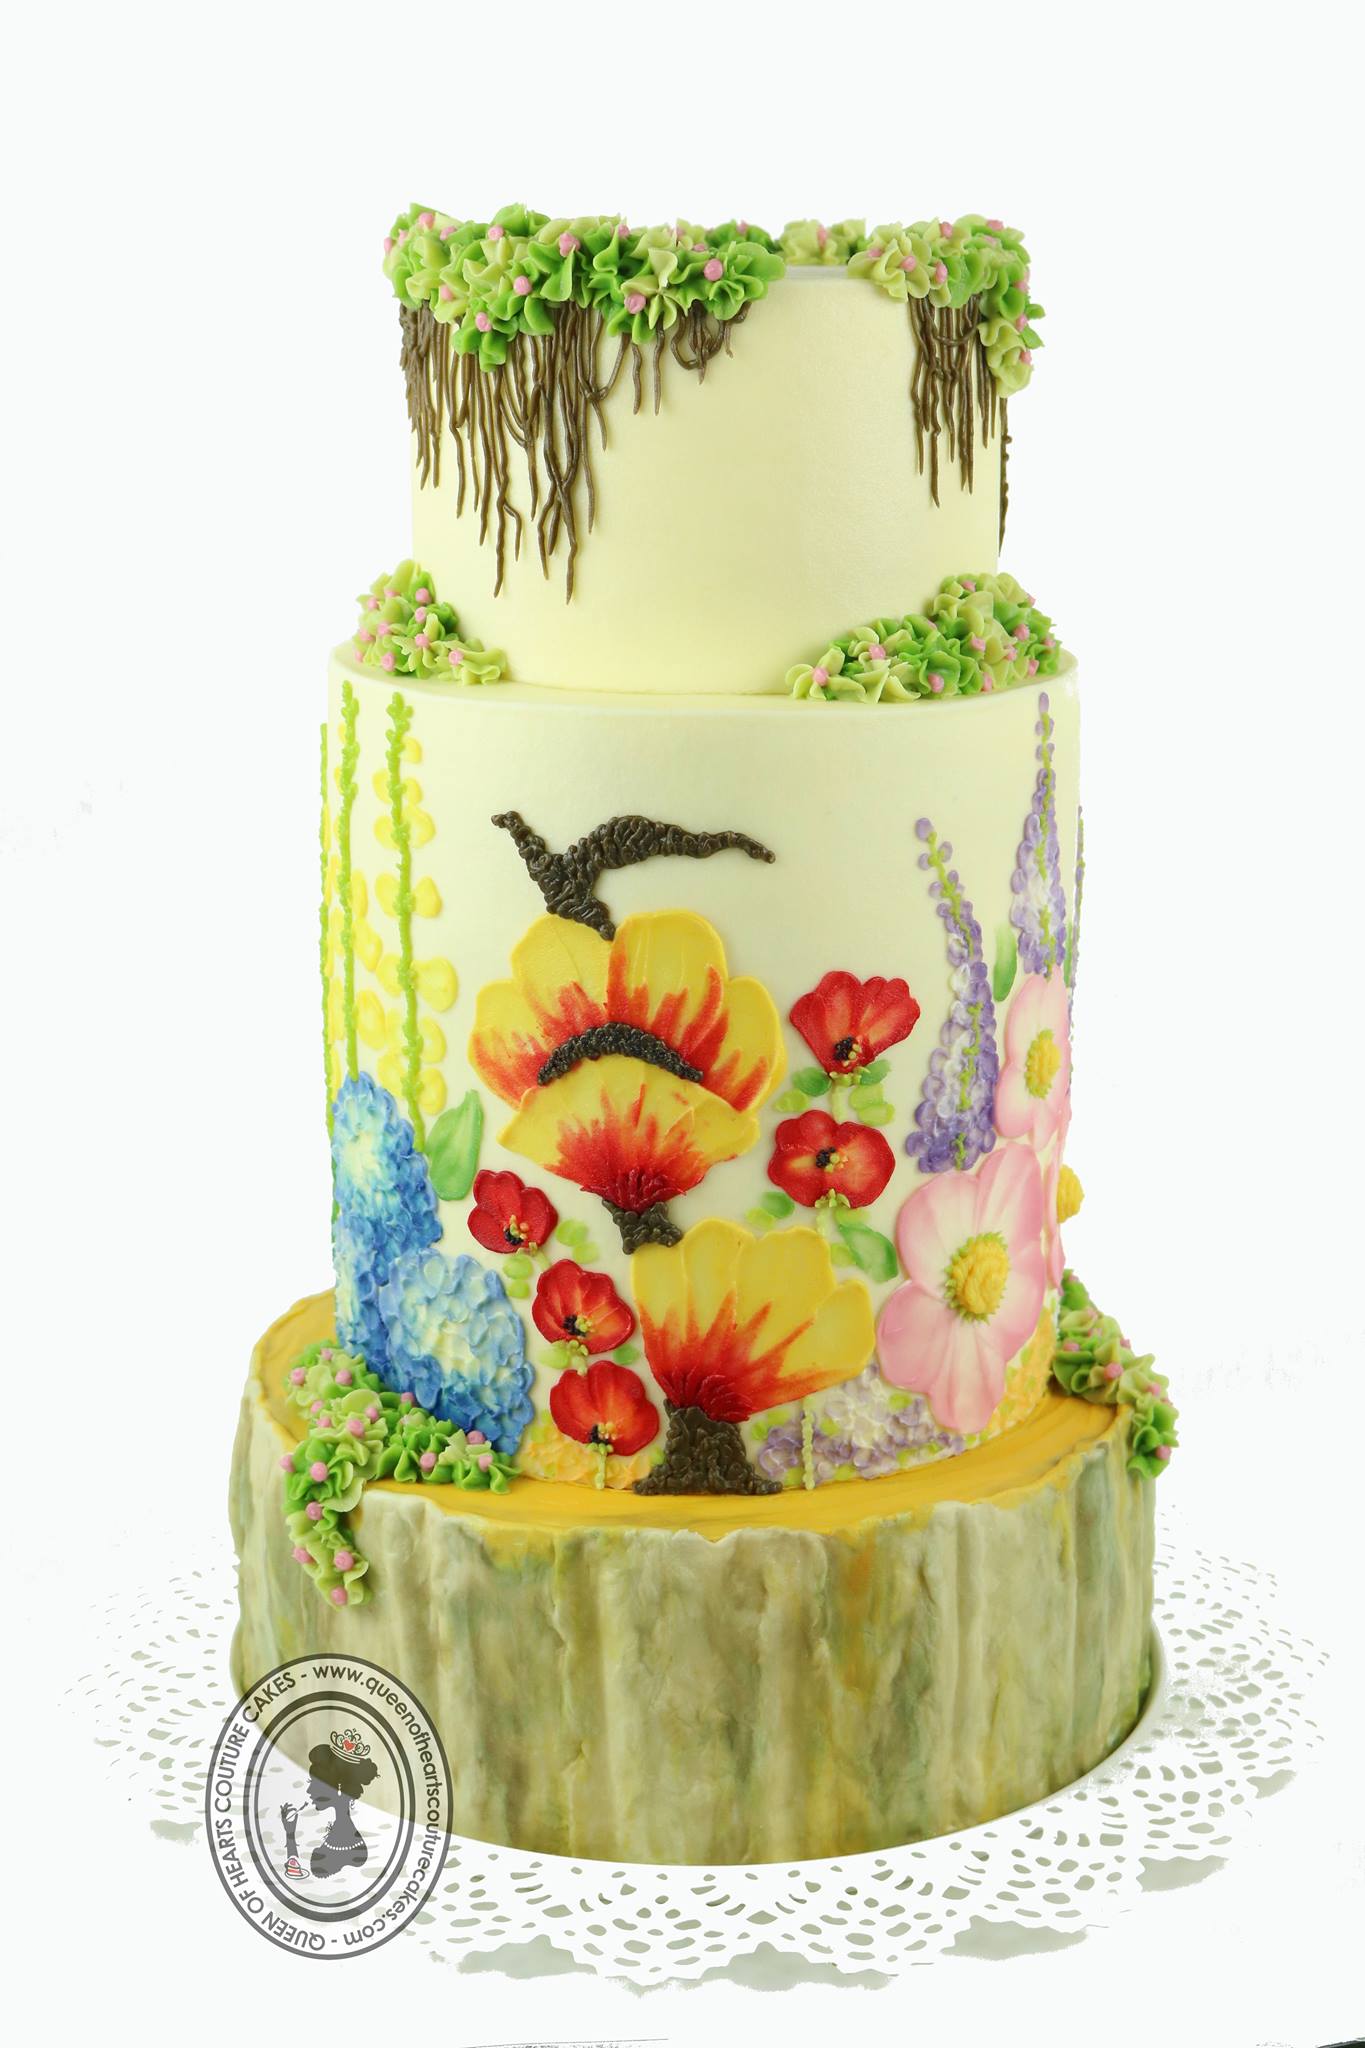 Christina Ong, Valeri Valeriano, Queen of Hearts Couture Cakes, buttercream